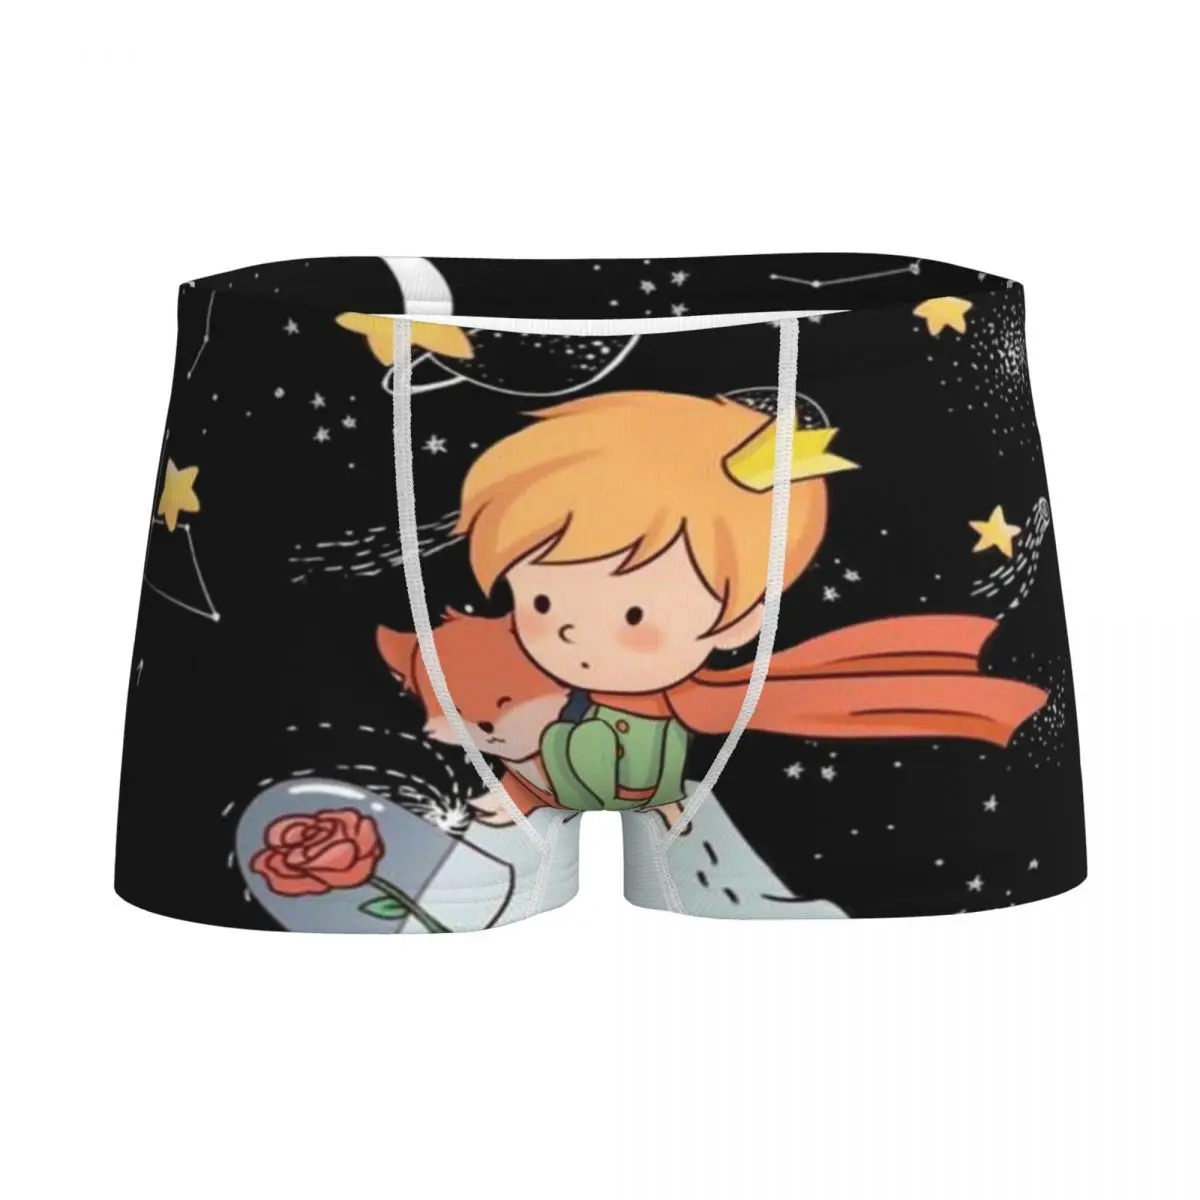 

Children's Boy Underwear The Little Prince Young Shorts Panties Boxer Shorts Prince Fox Rose Stars Teenage Cotton Underpants